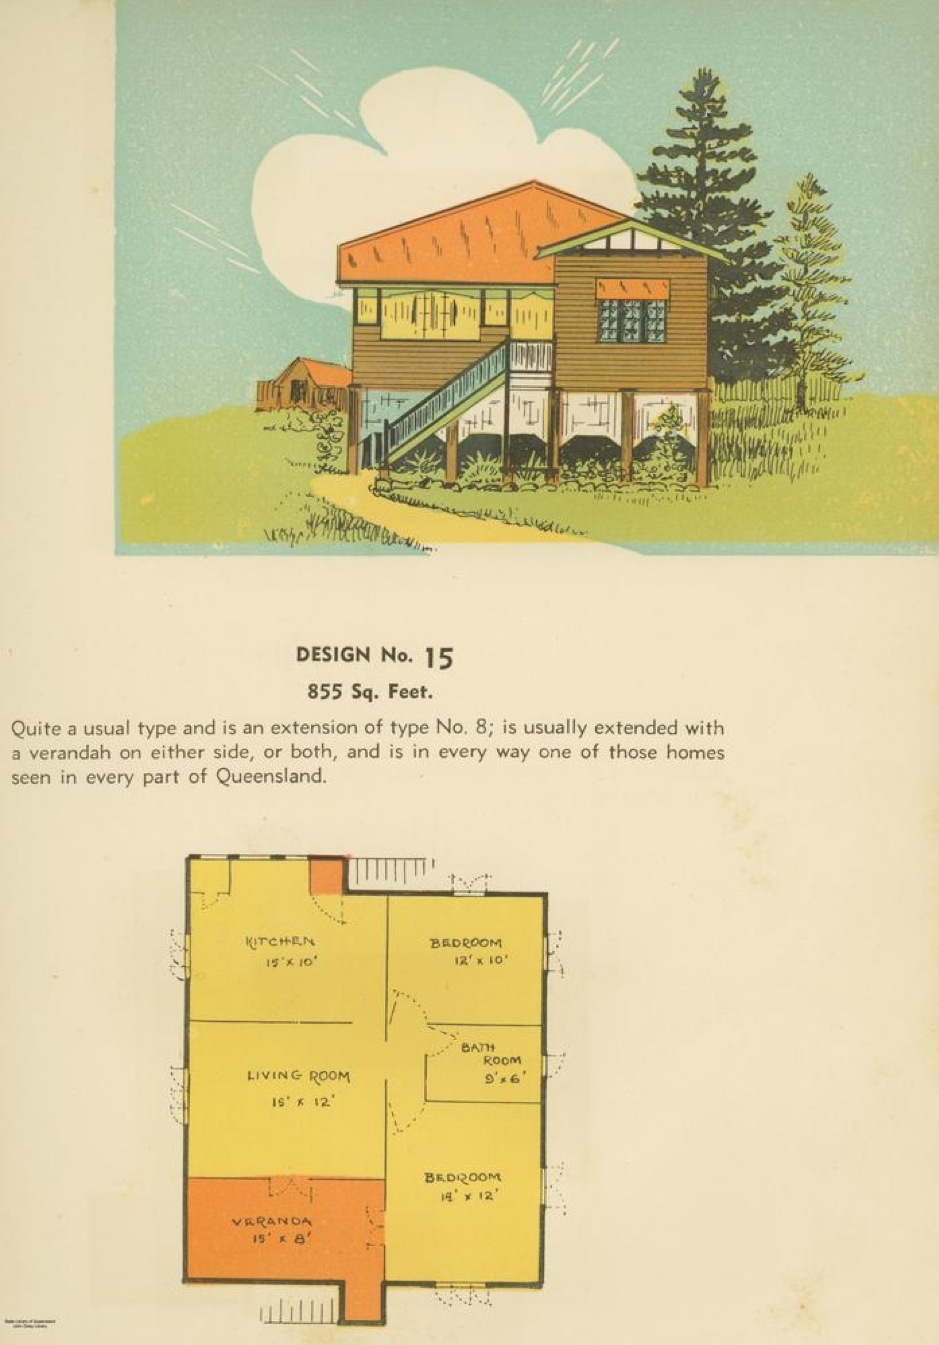 A picture of a multi gable house and a drawing of a plan